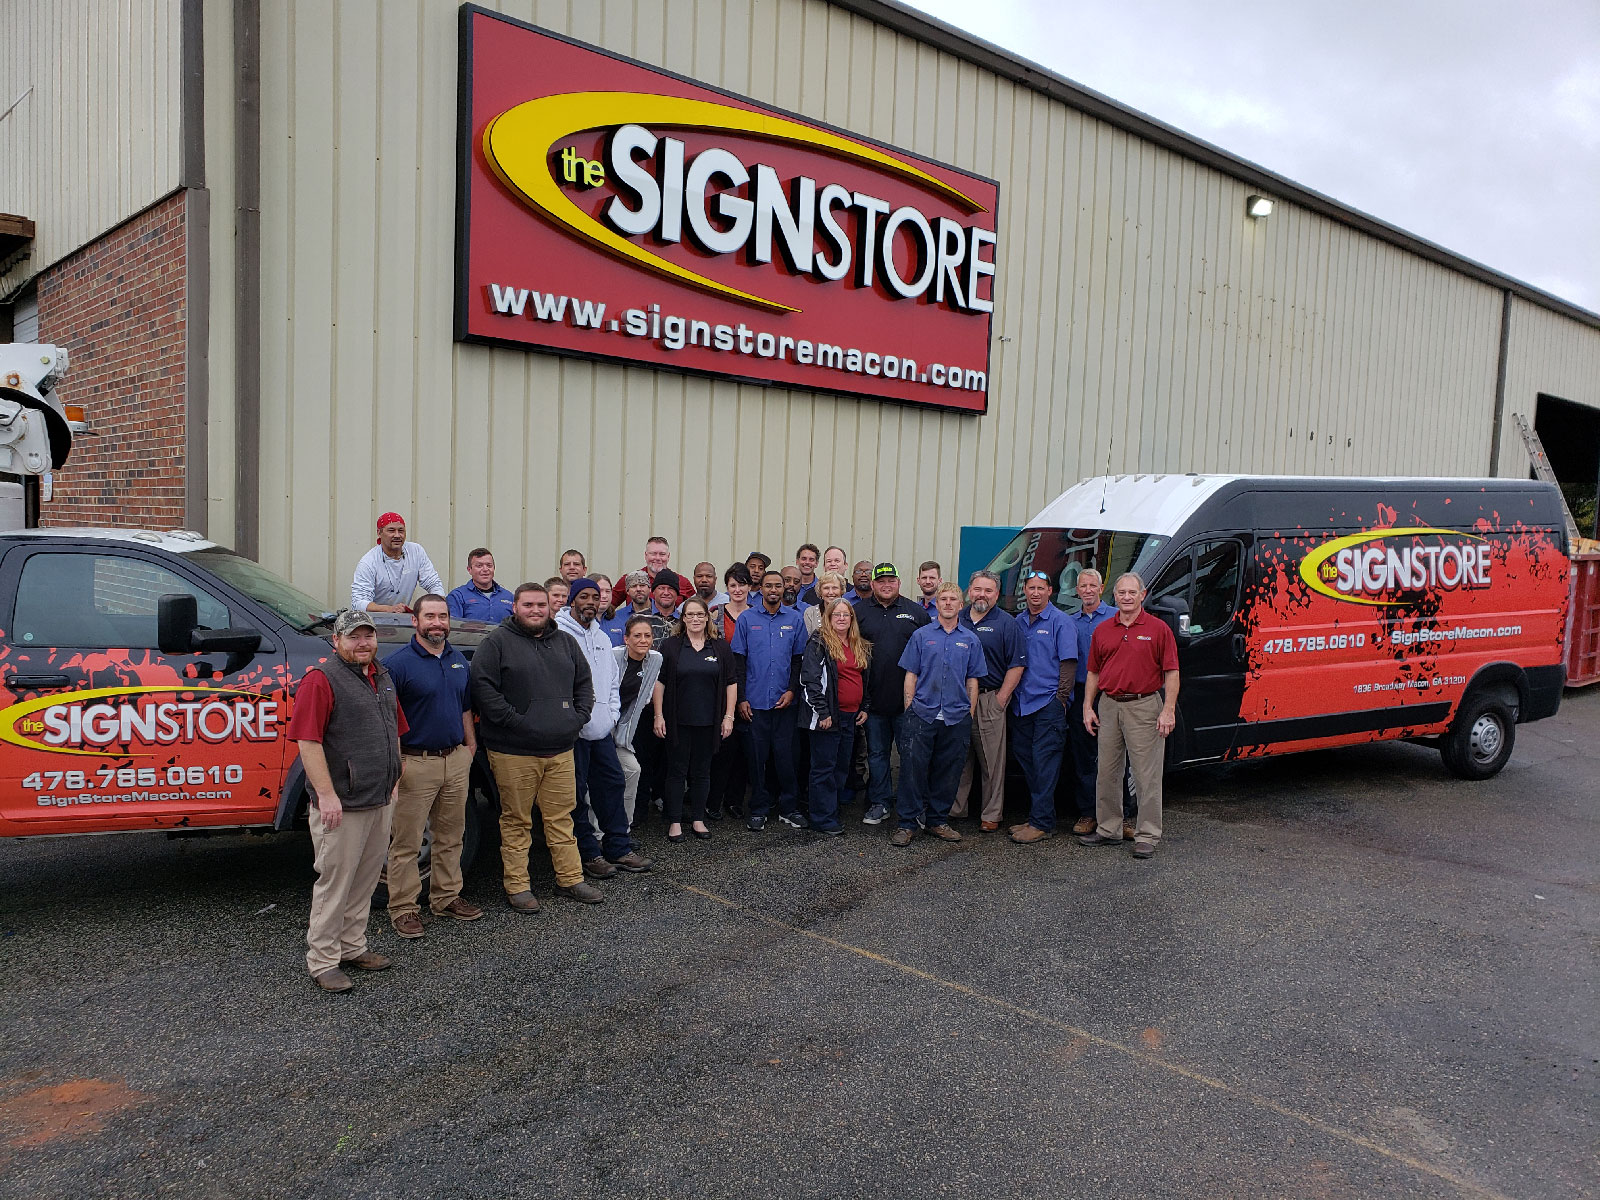 Exterior Photo of The Sign Store and Employees